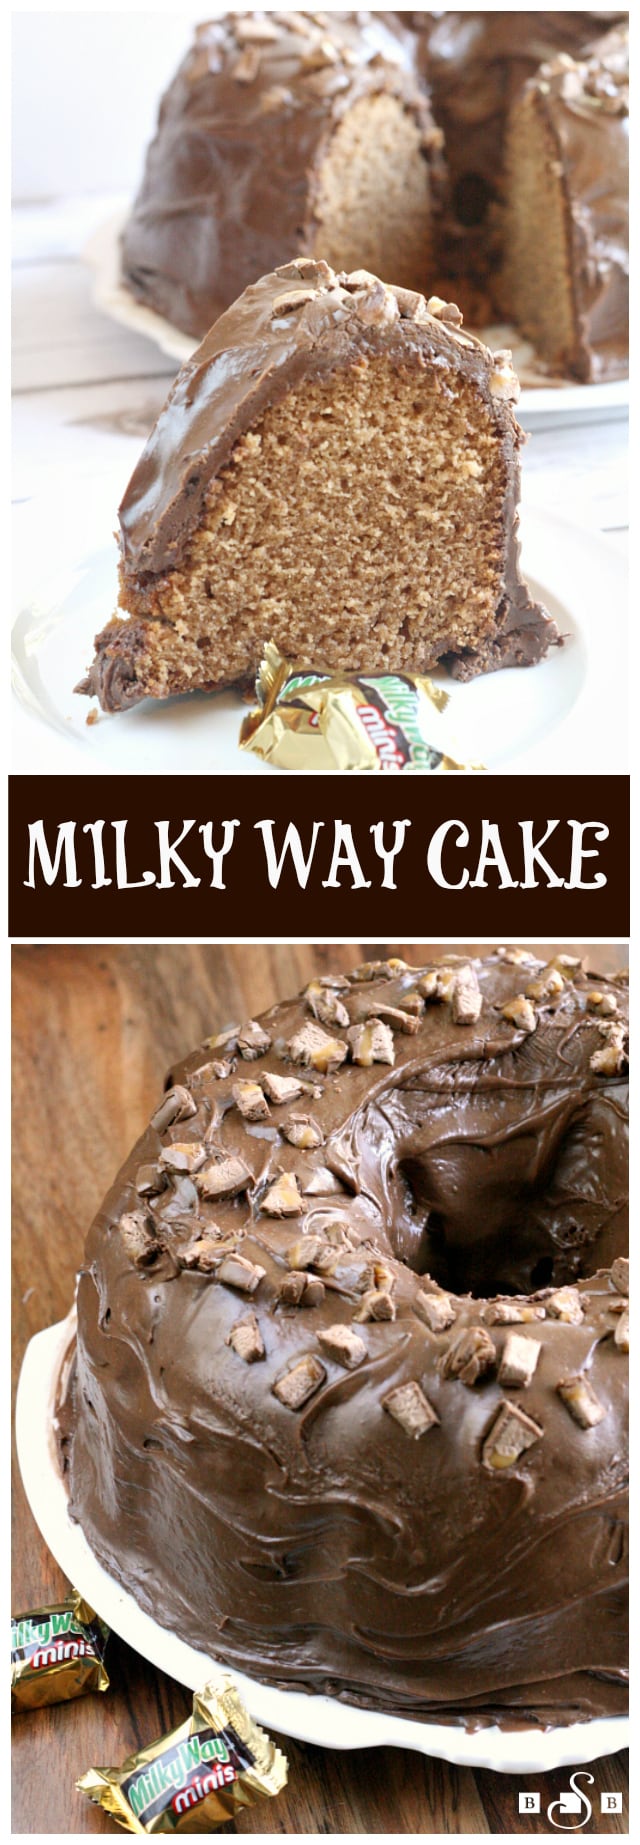 Milky Way Cake is a huge hit at our house, it is made with melted Milky Way candy bars and topped with a chocolate marshmallow ganache!